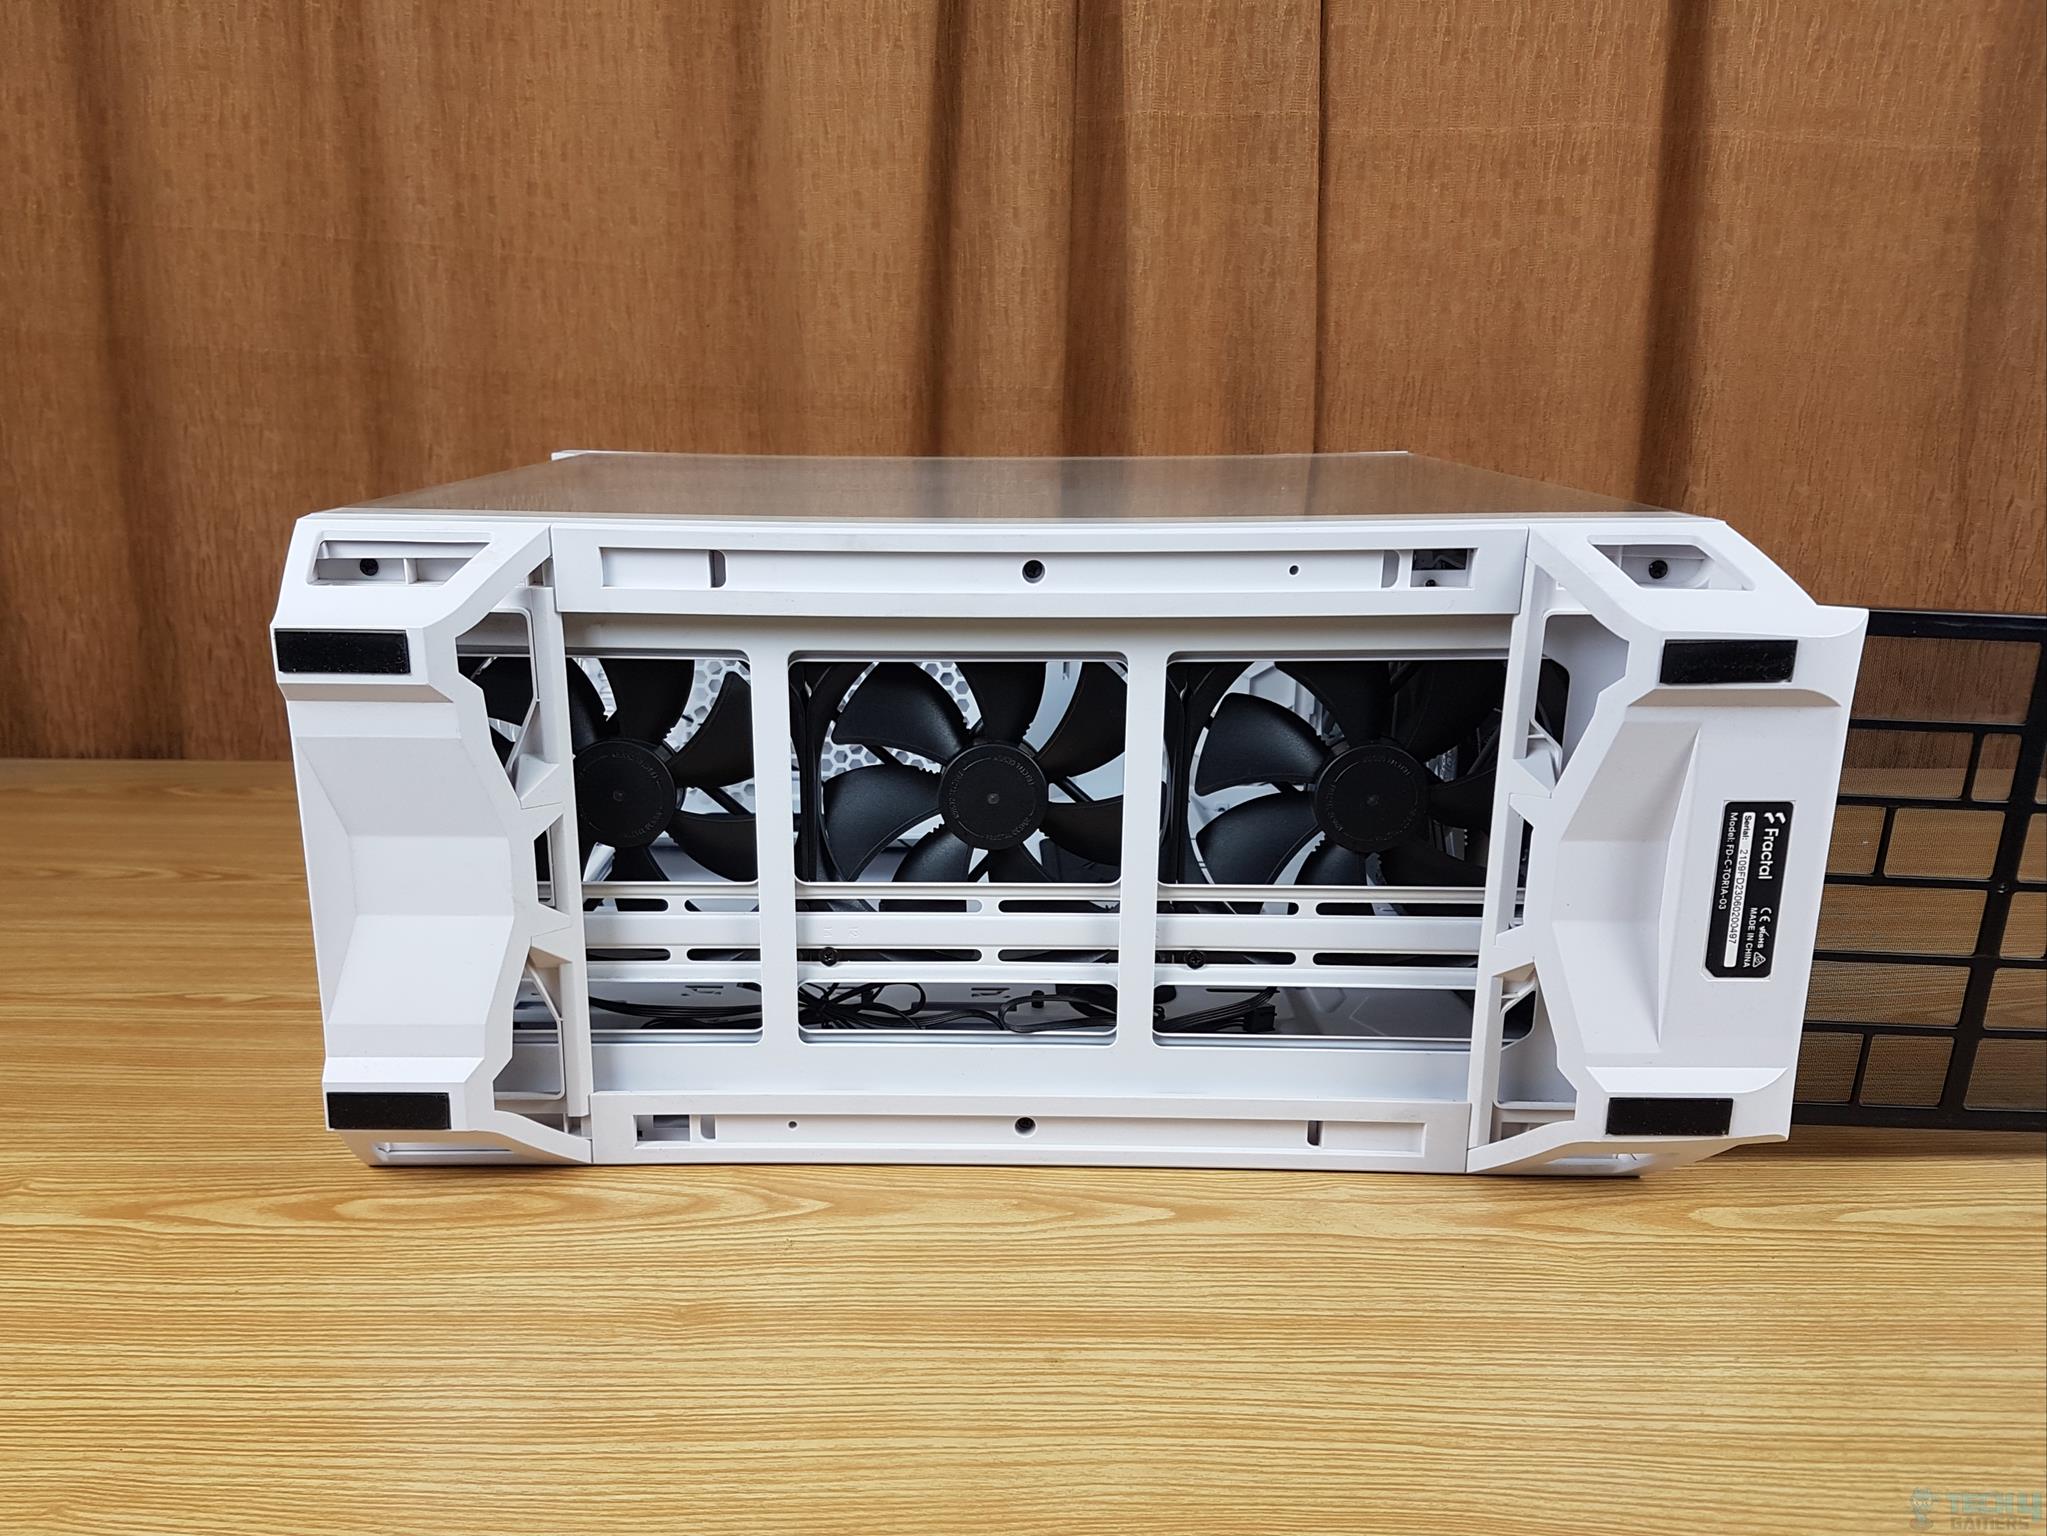 Fractal Design Torrent White TG Clear Tint PC Case — The fan bracket installed at the base of the case